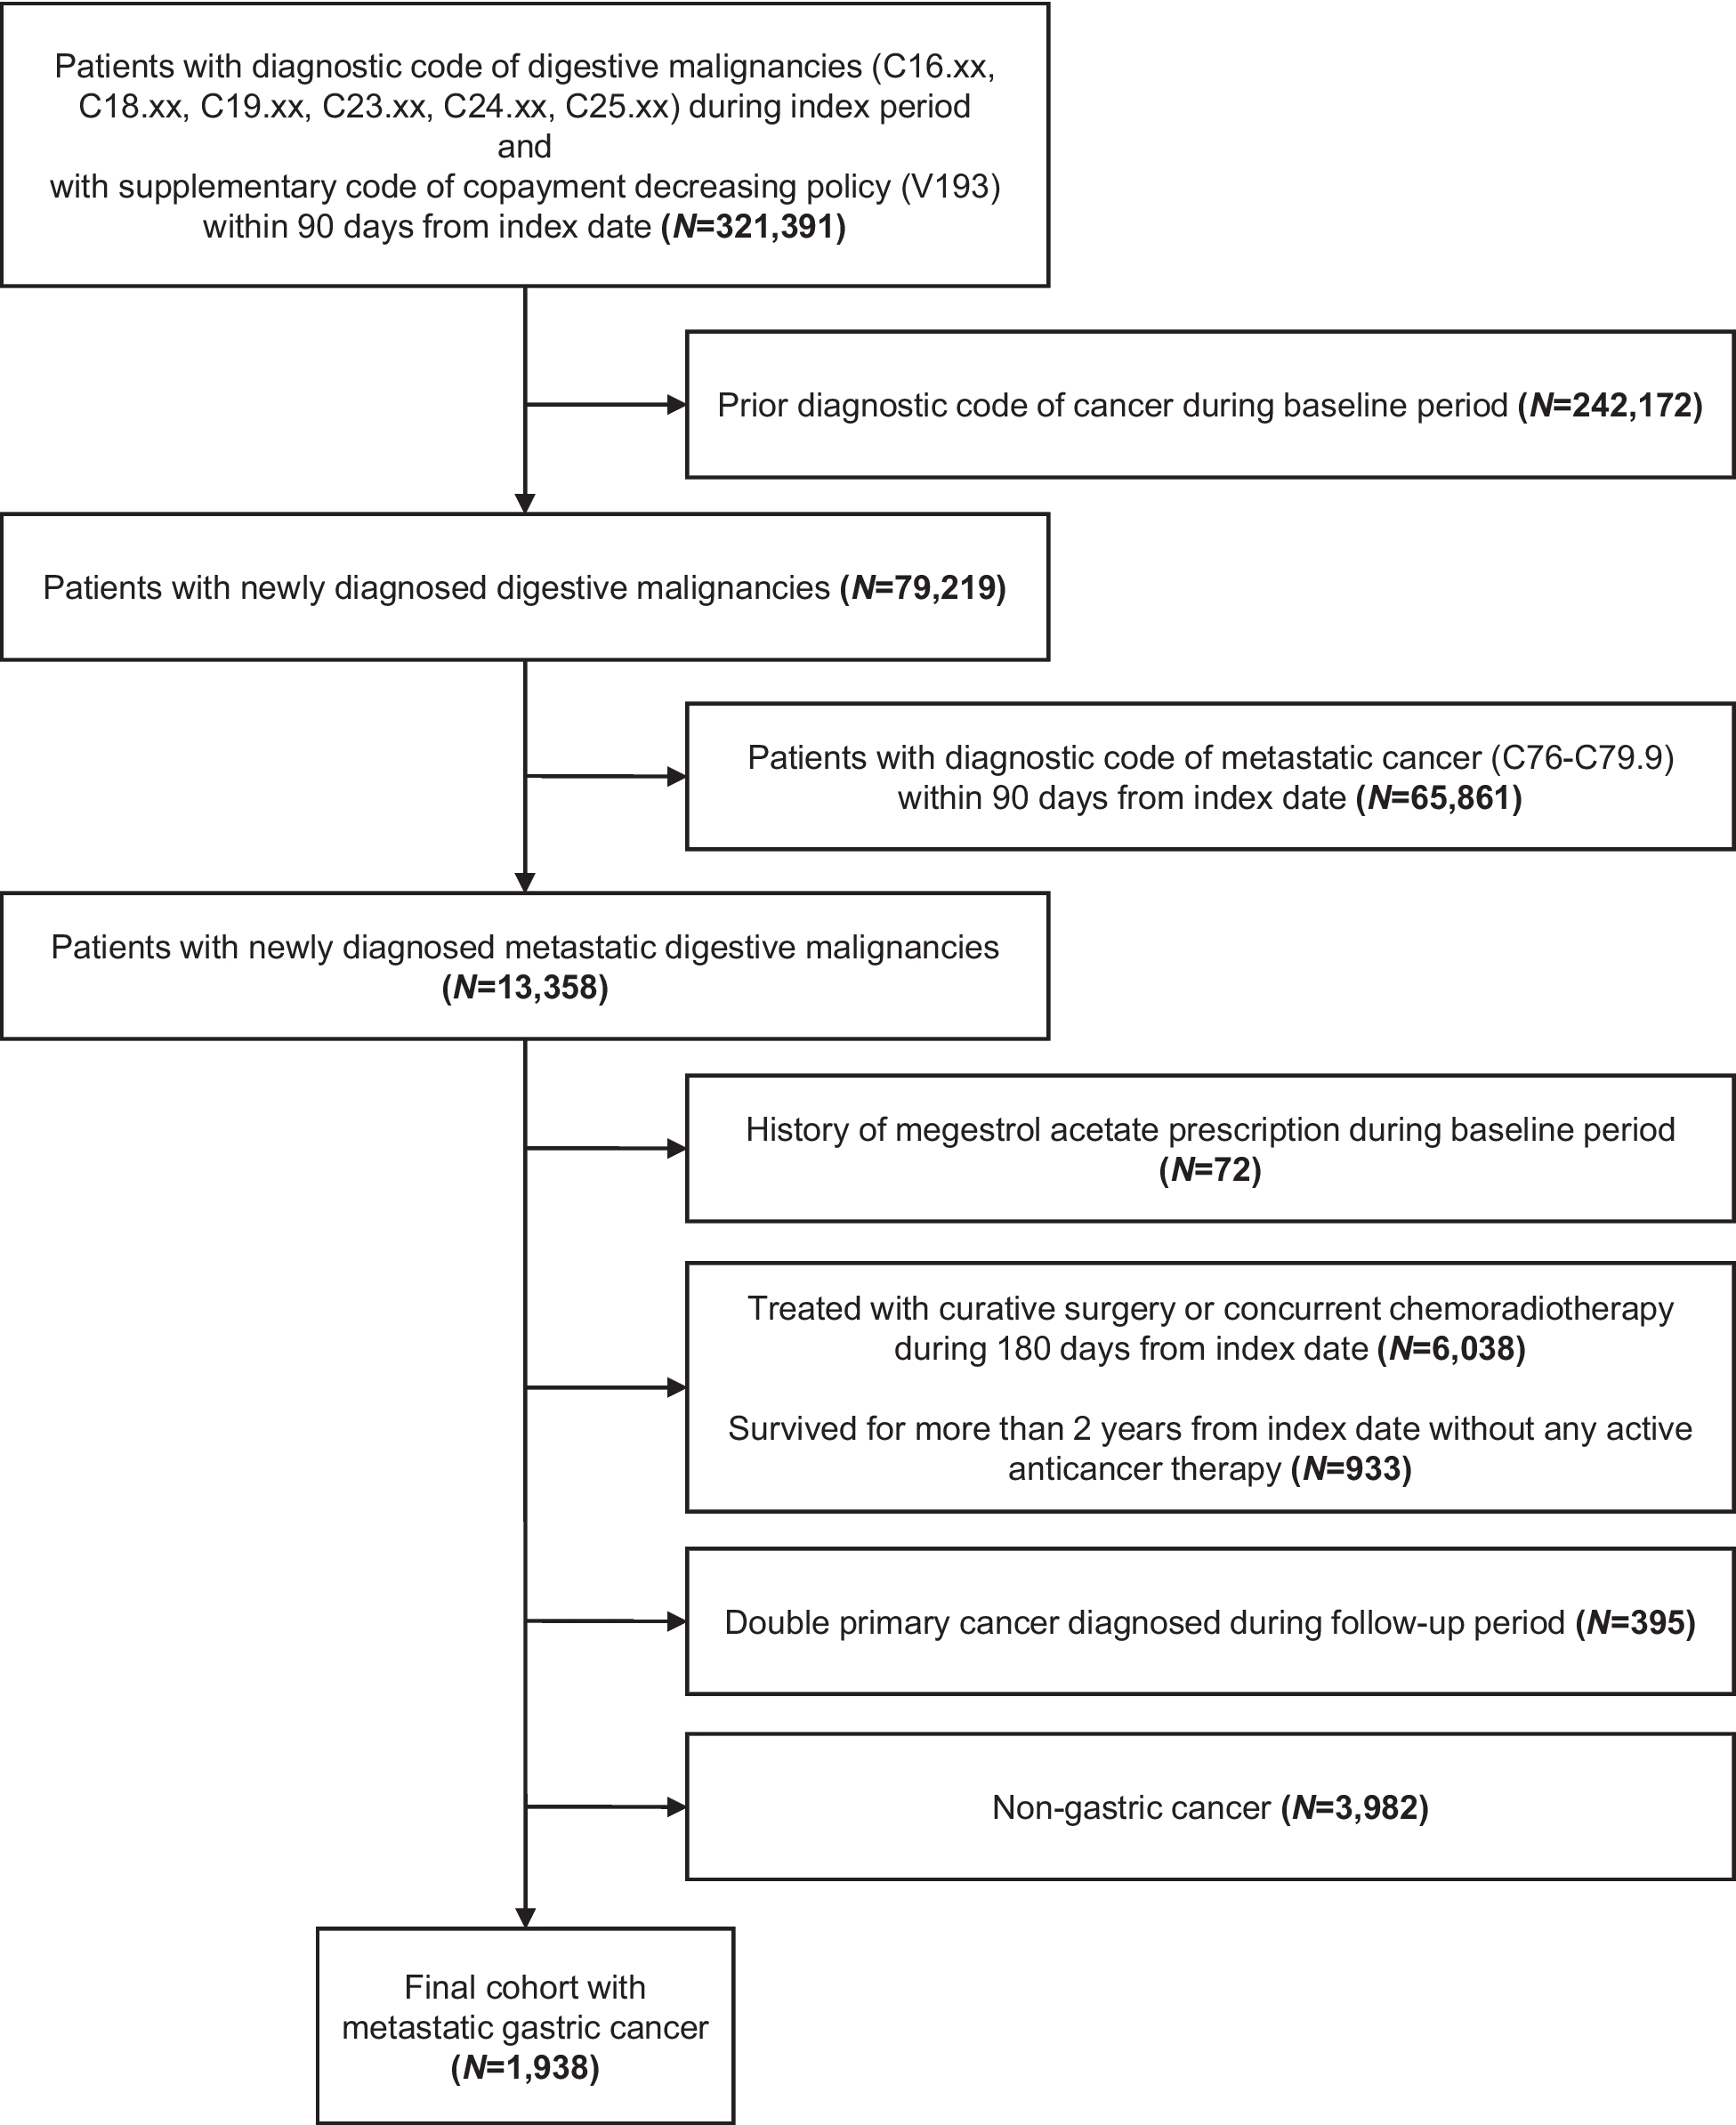 Clinical implication of megestrol acetate in metastatic gastric cancer: a big data analysis from Health Insurance Review and Assessment (HIRA) database